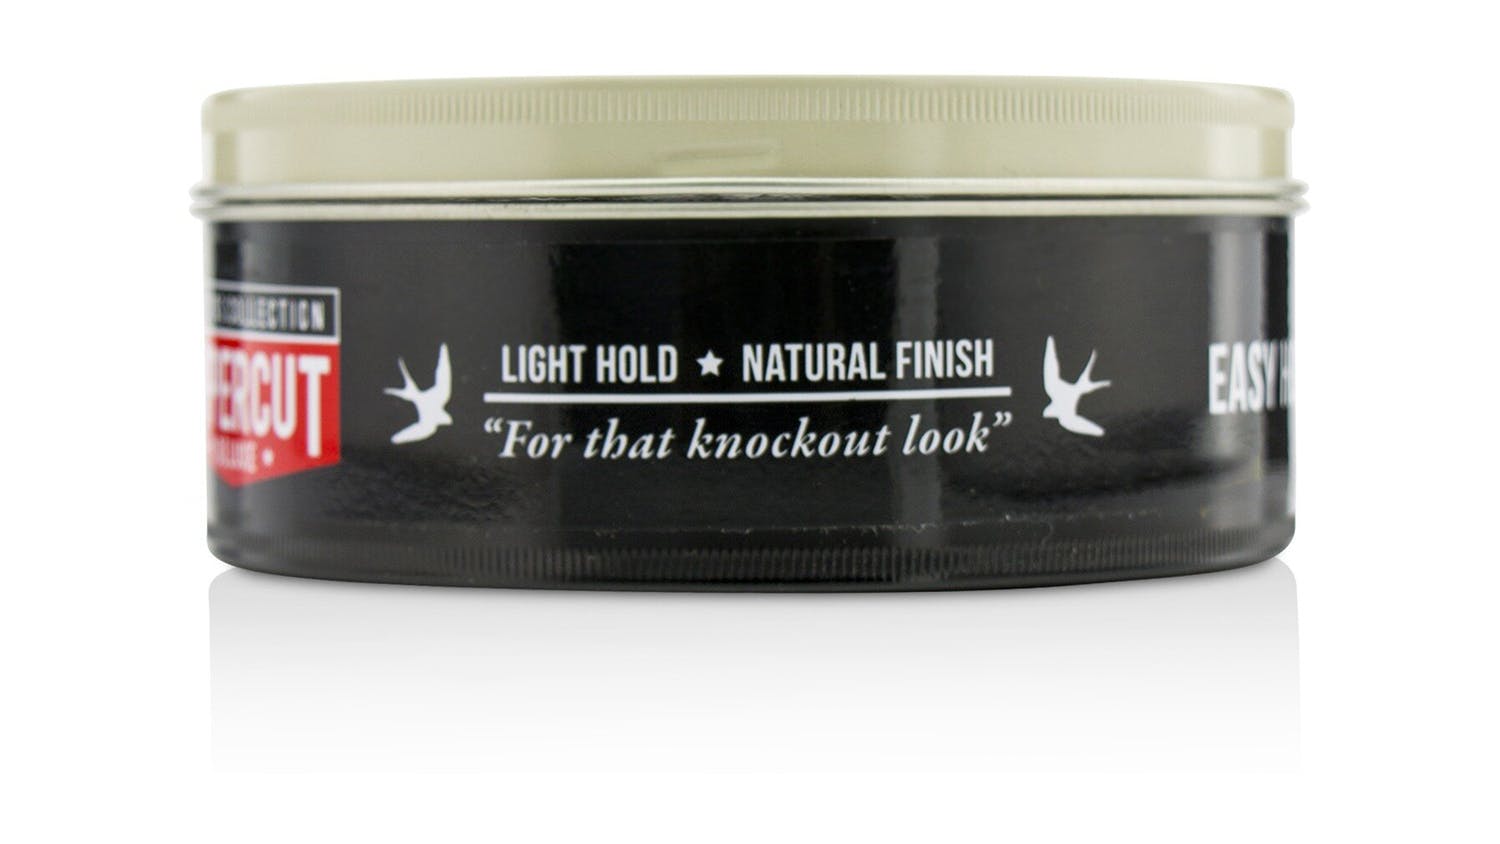 Uppercut Deluxe Barbers Collection Easy Hold - 300g/10.5oz